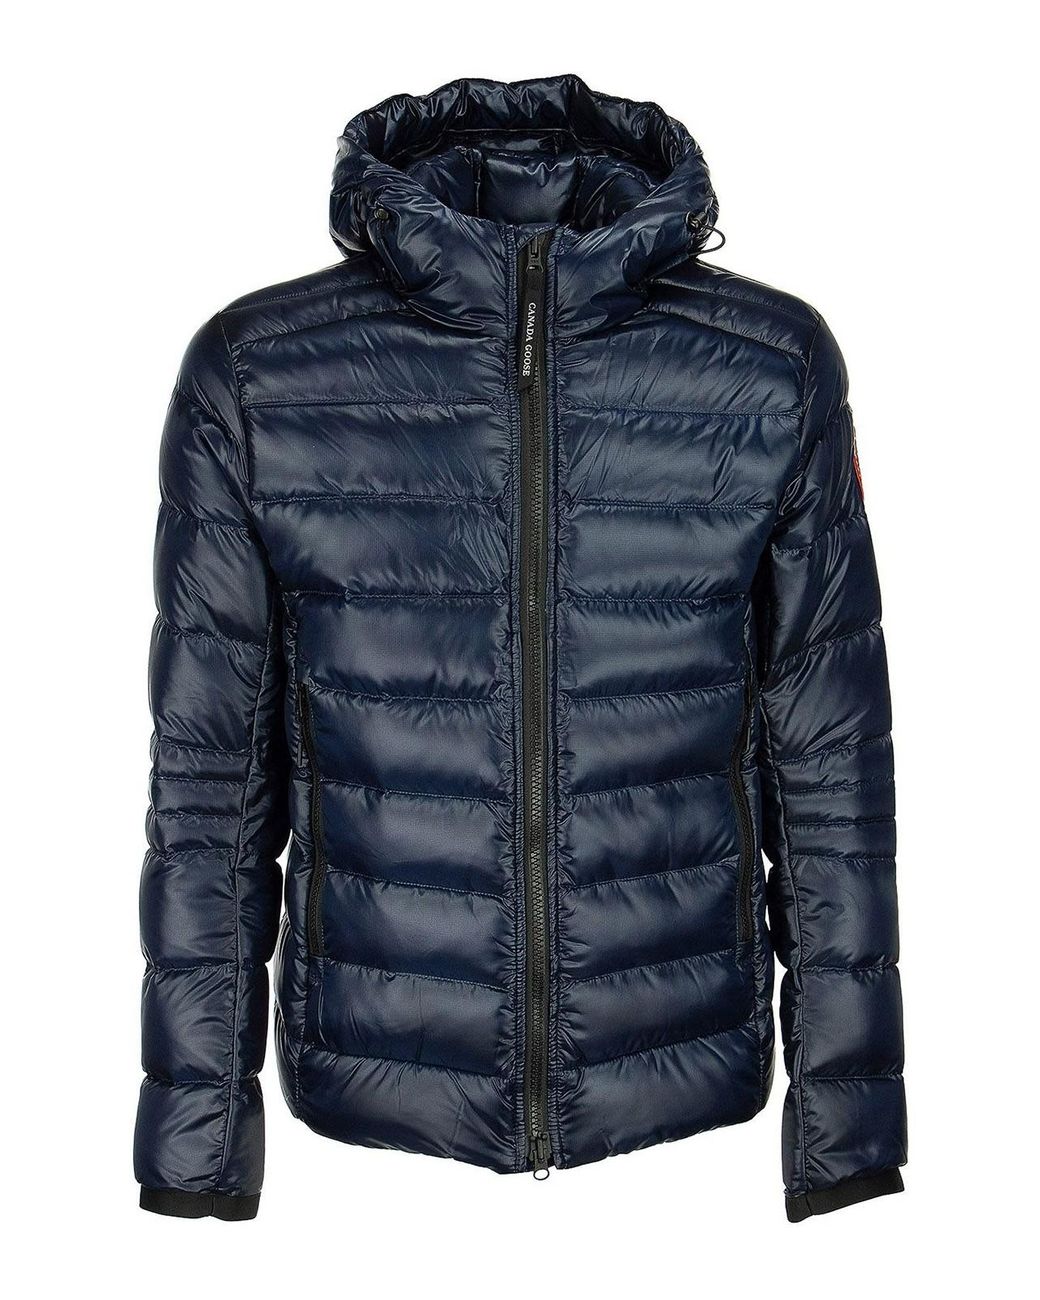 Canada Goose Crofton Hooded Puffer Jacket in Blue for Men - Lyst